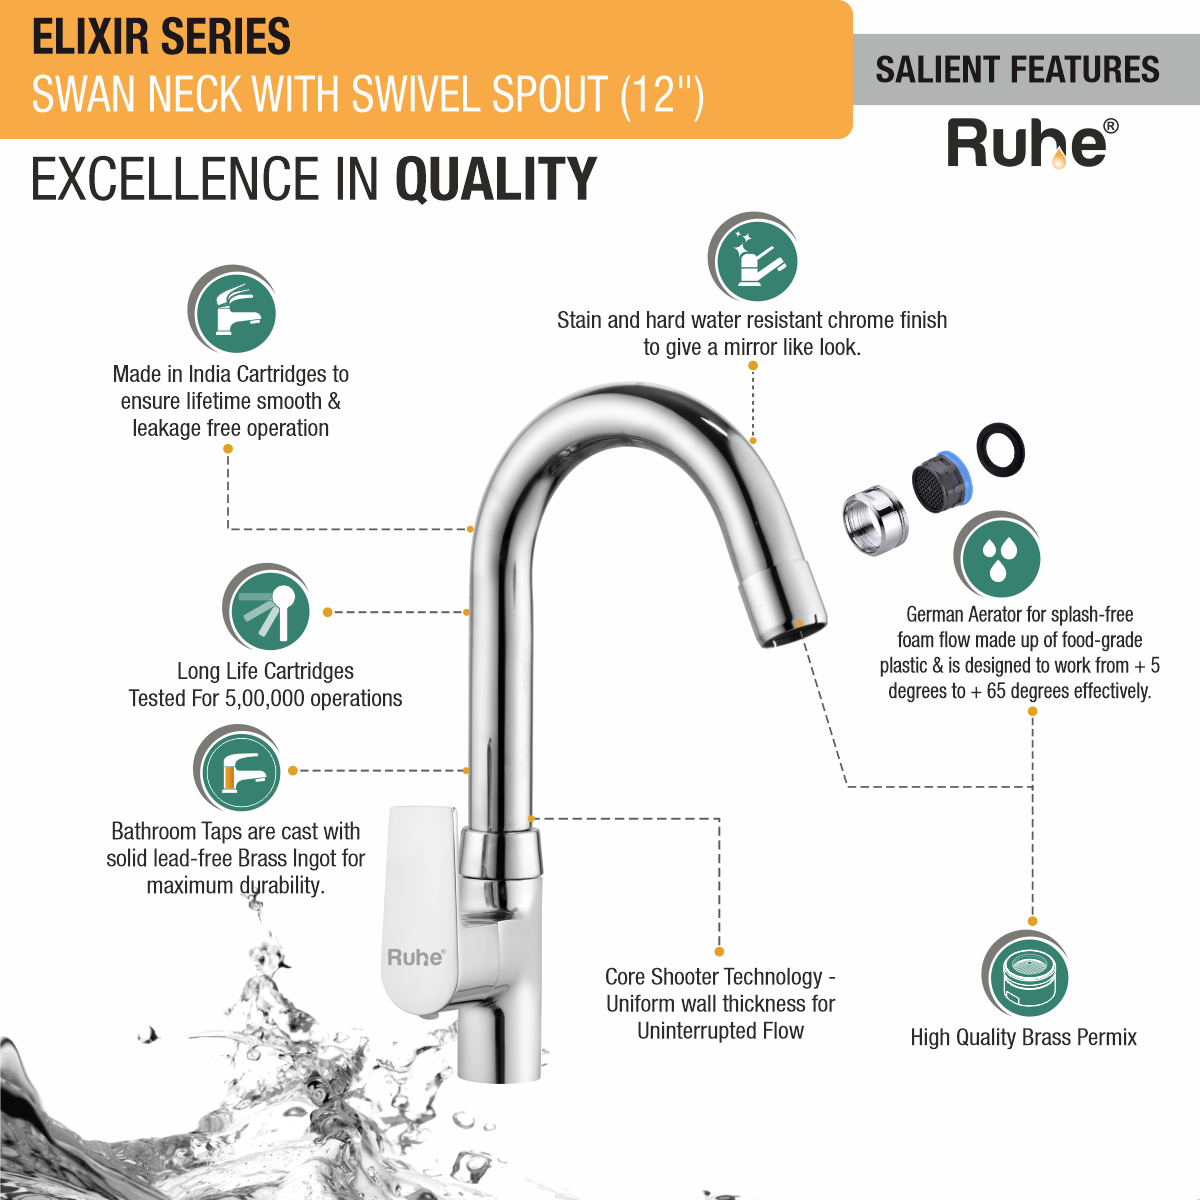 Elixir Swan Neck with Small (12 inches) Round Swivel Spout Faucet features